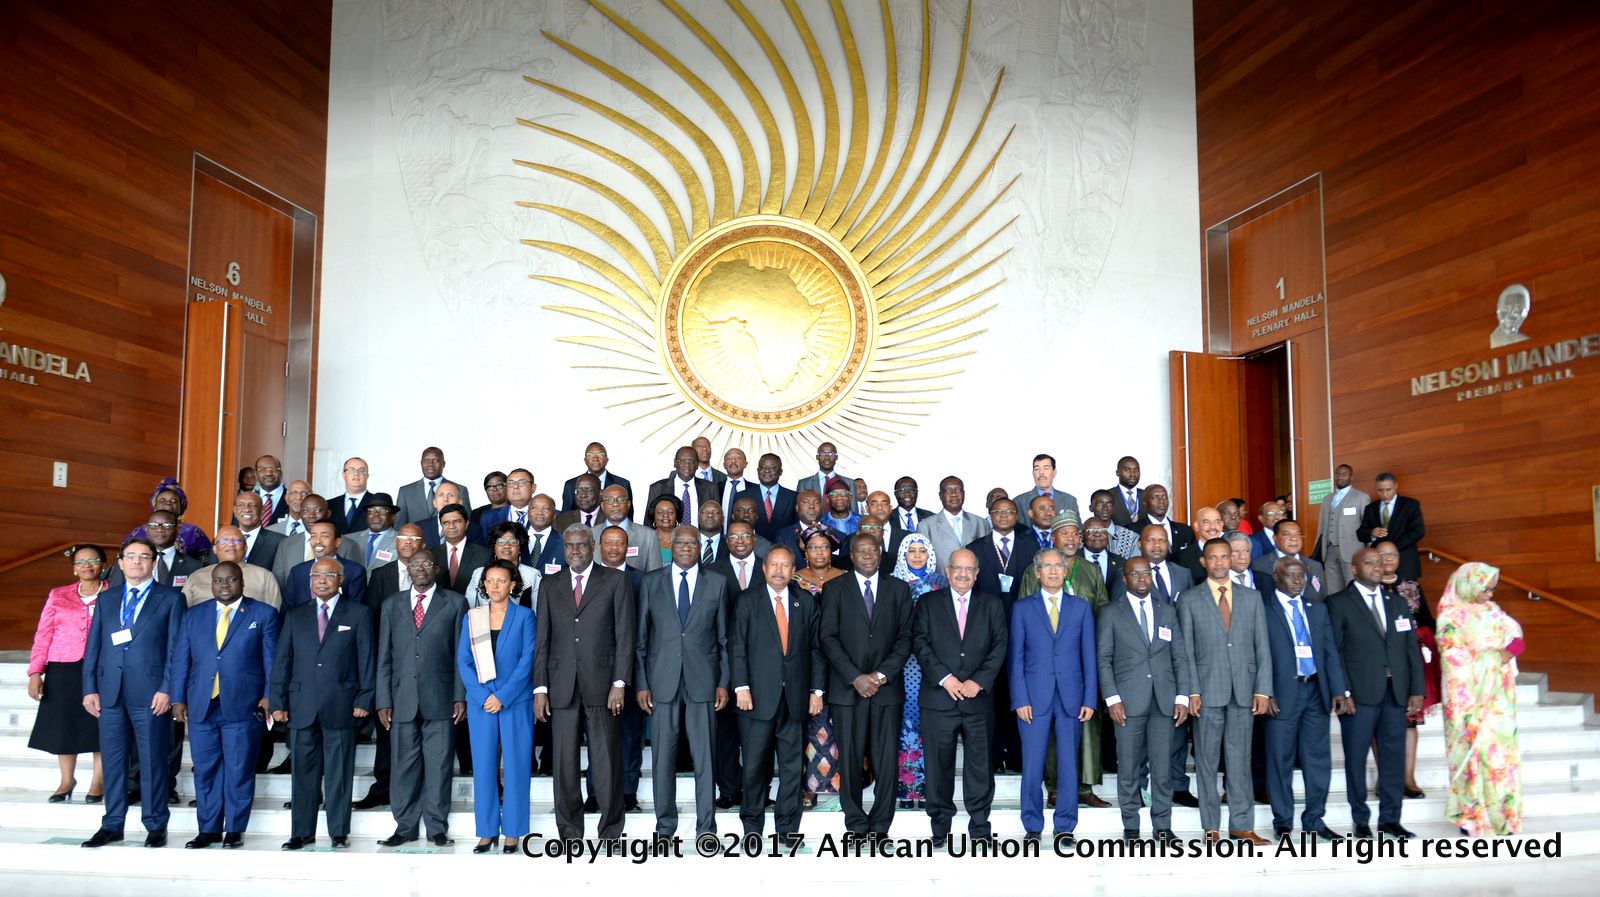 African Union: Between Collusion and Integrity